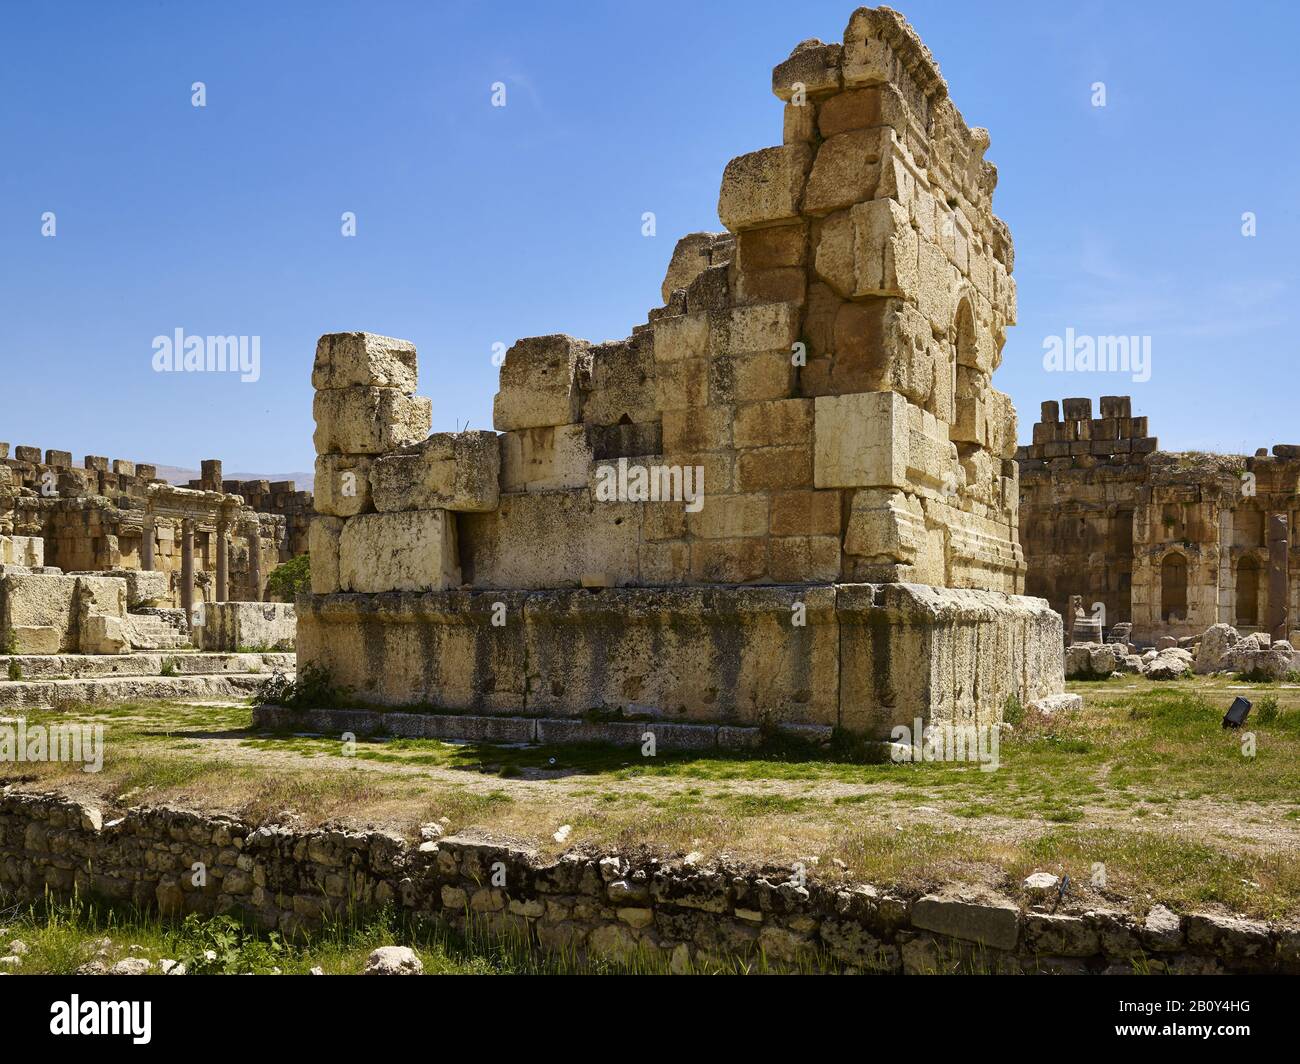 Ceremonial courtyard with altar in the ancient city of Baalbek, Lebanon, Stock Photo